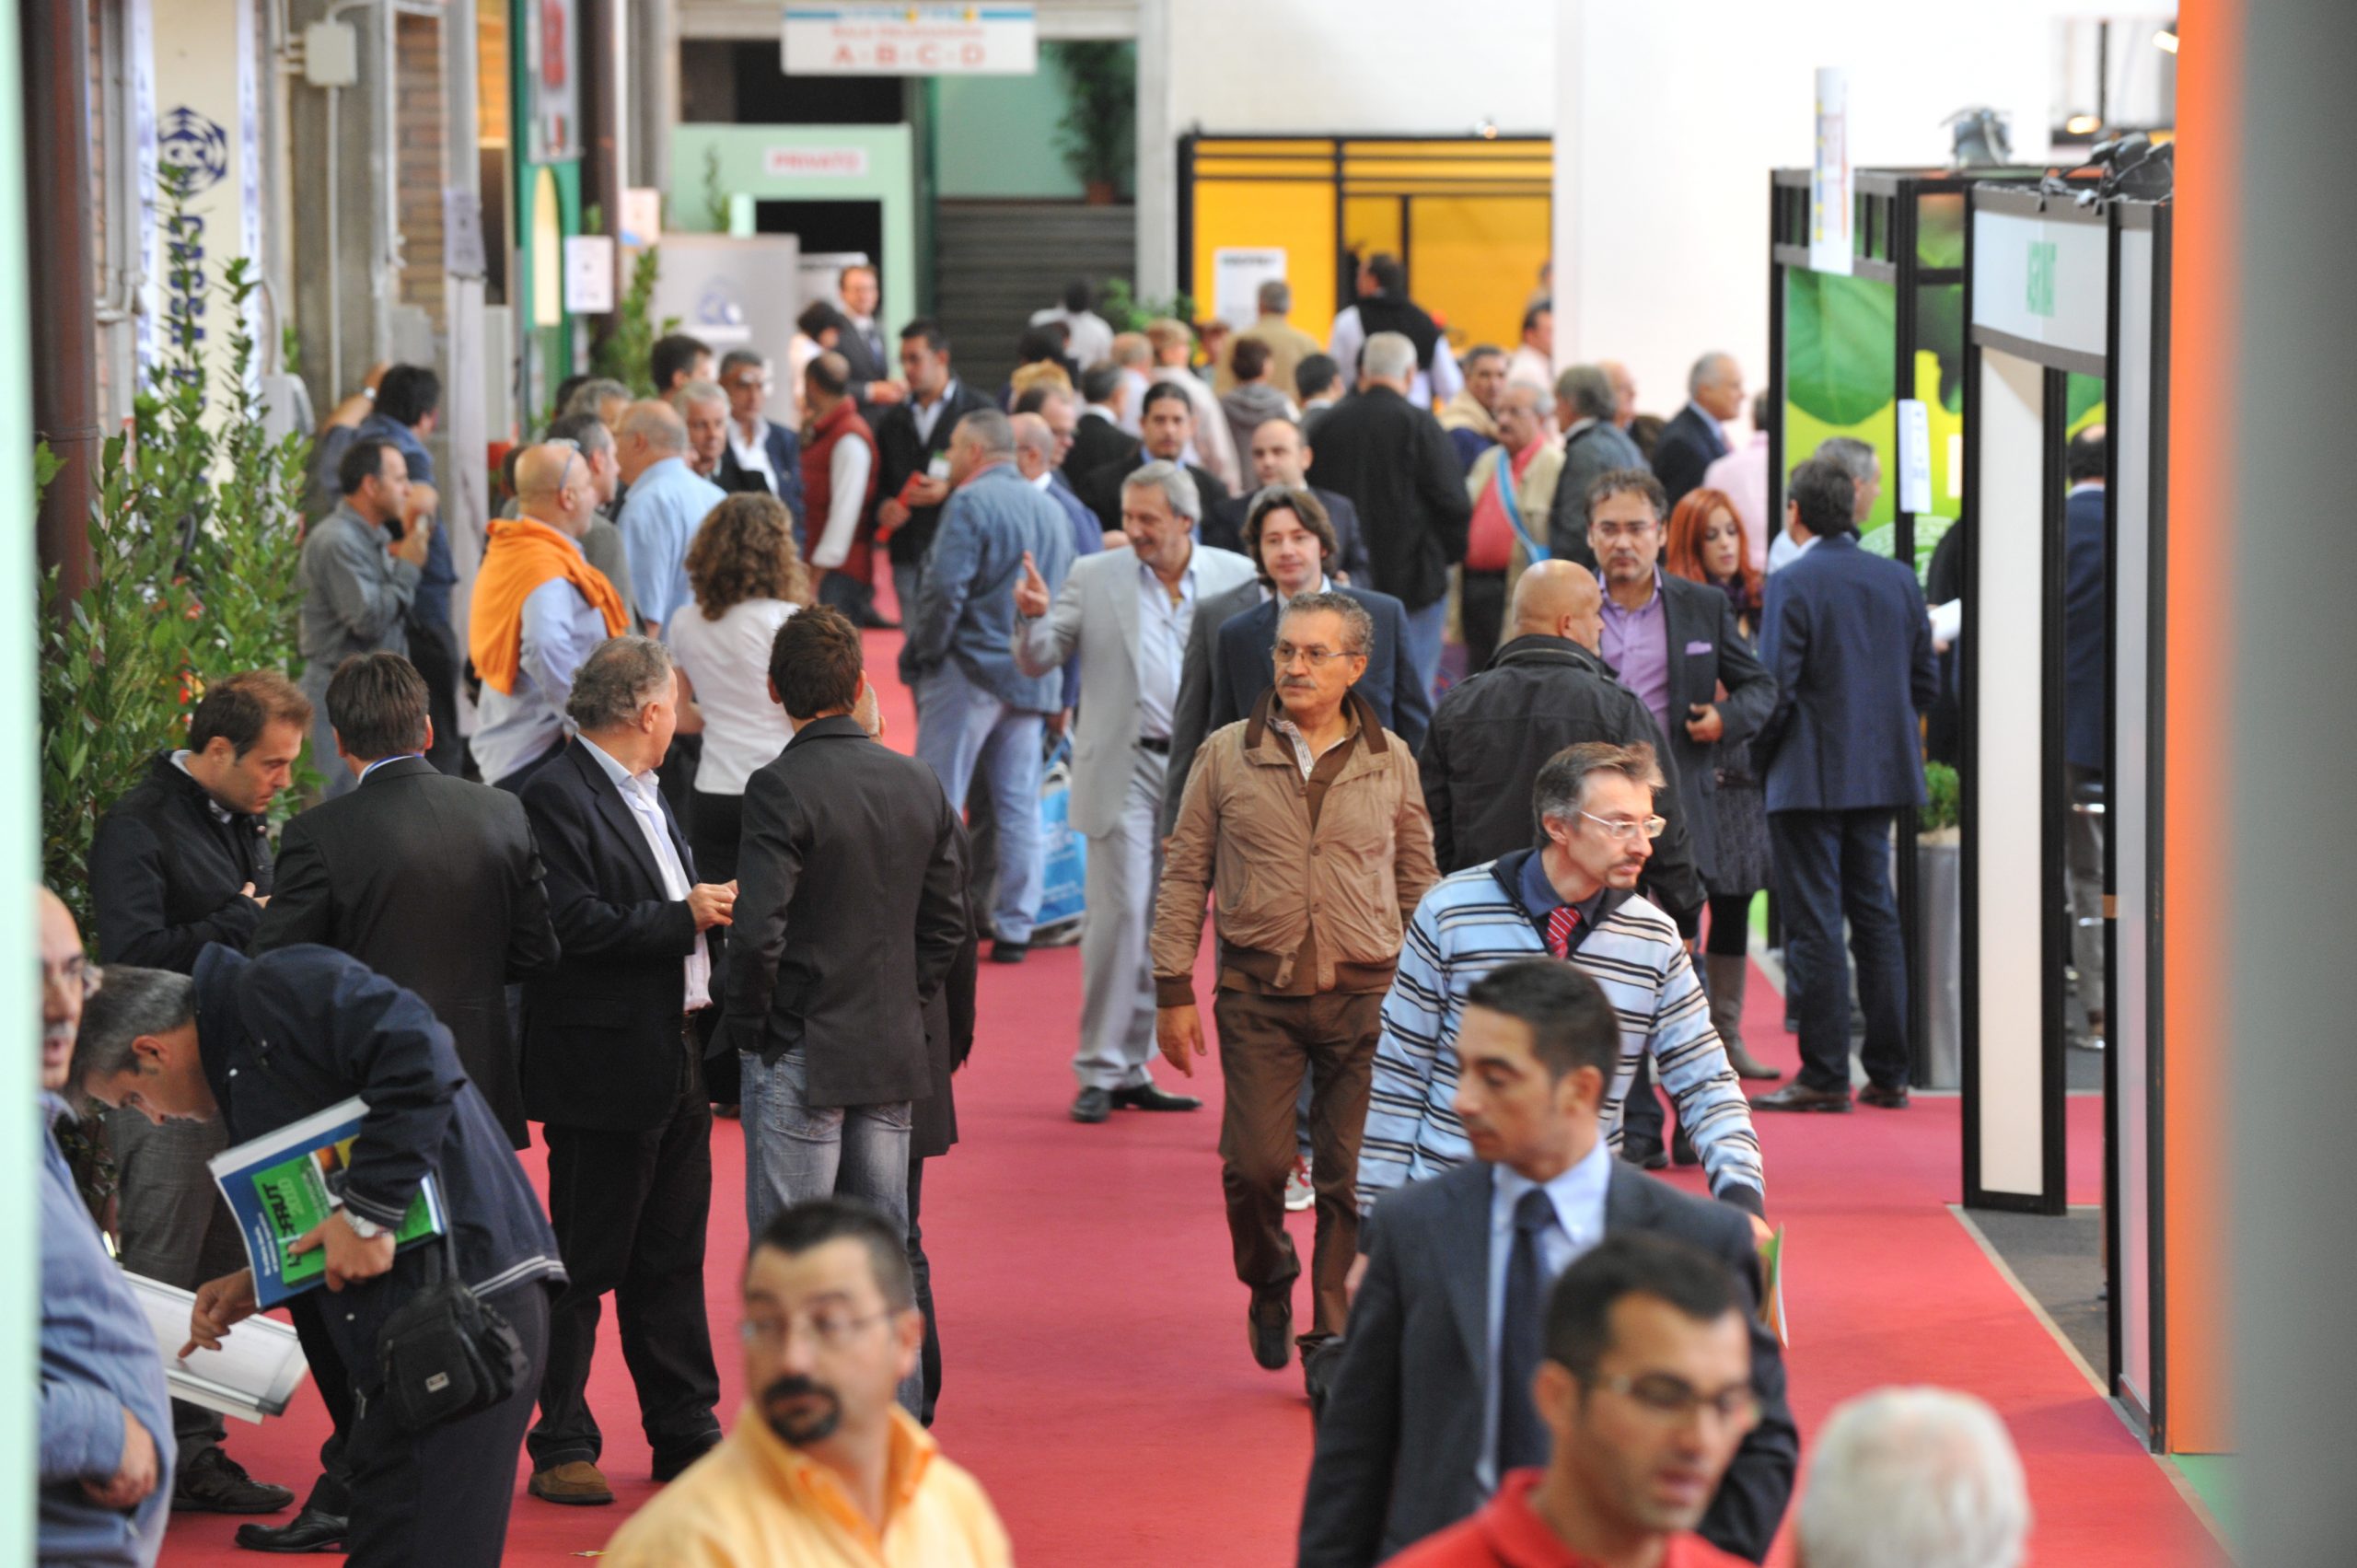 Being held at the Rimini Expo Centre (Italy) from the 23-25 of this month, Macfrut has already received confirmation of participation from many international importers, distributors and retailers.